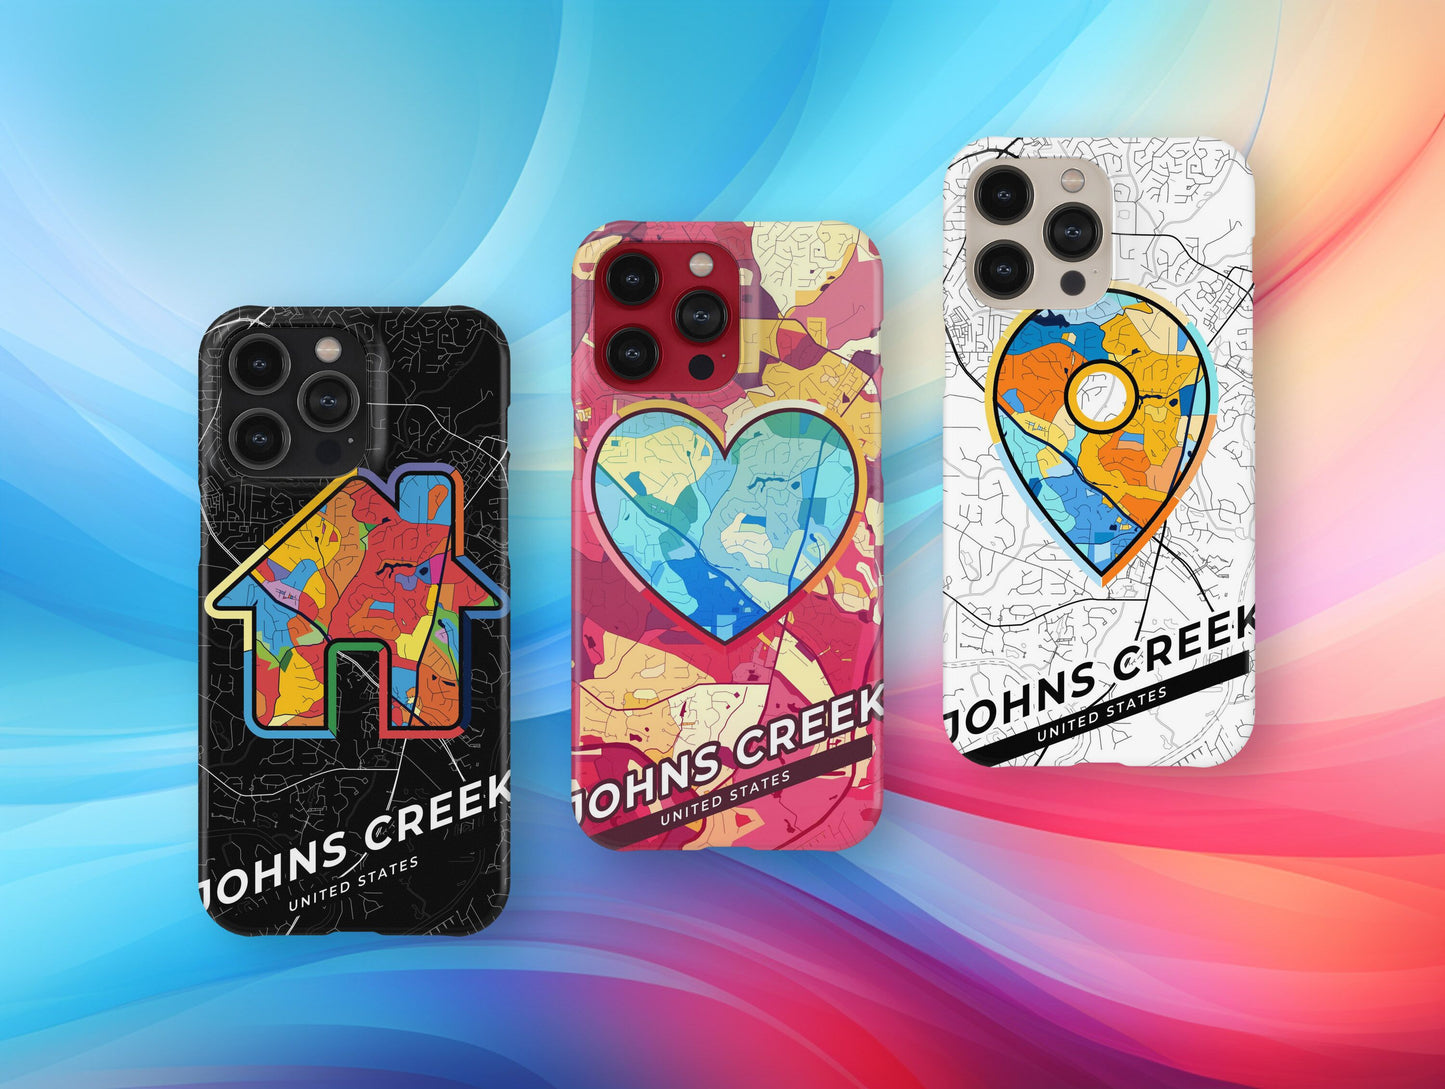 Johns Creek Georgia slim phone case with colorful icon. Birthday, wedding or housewarming gift. Couple match cases.